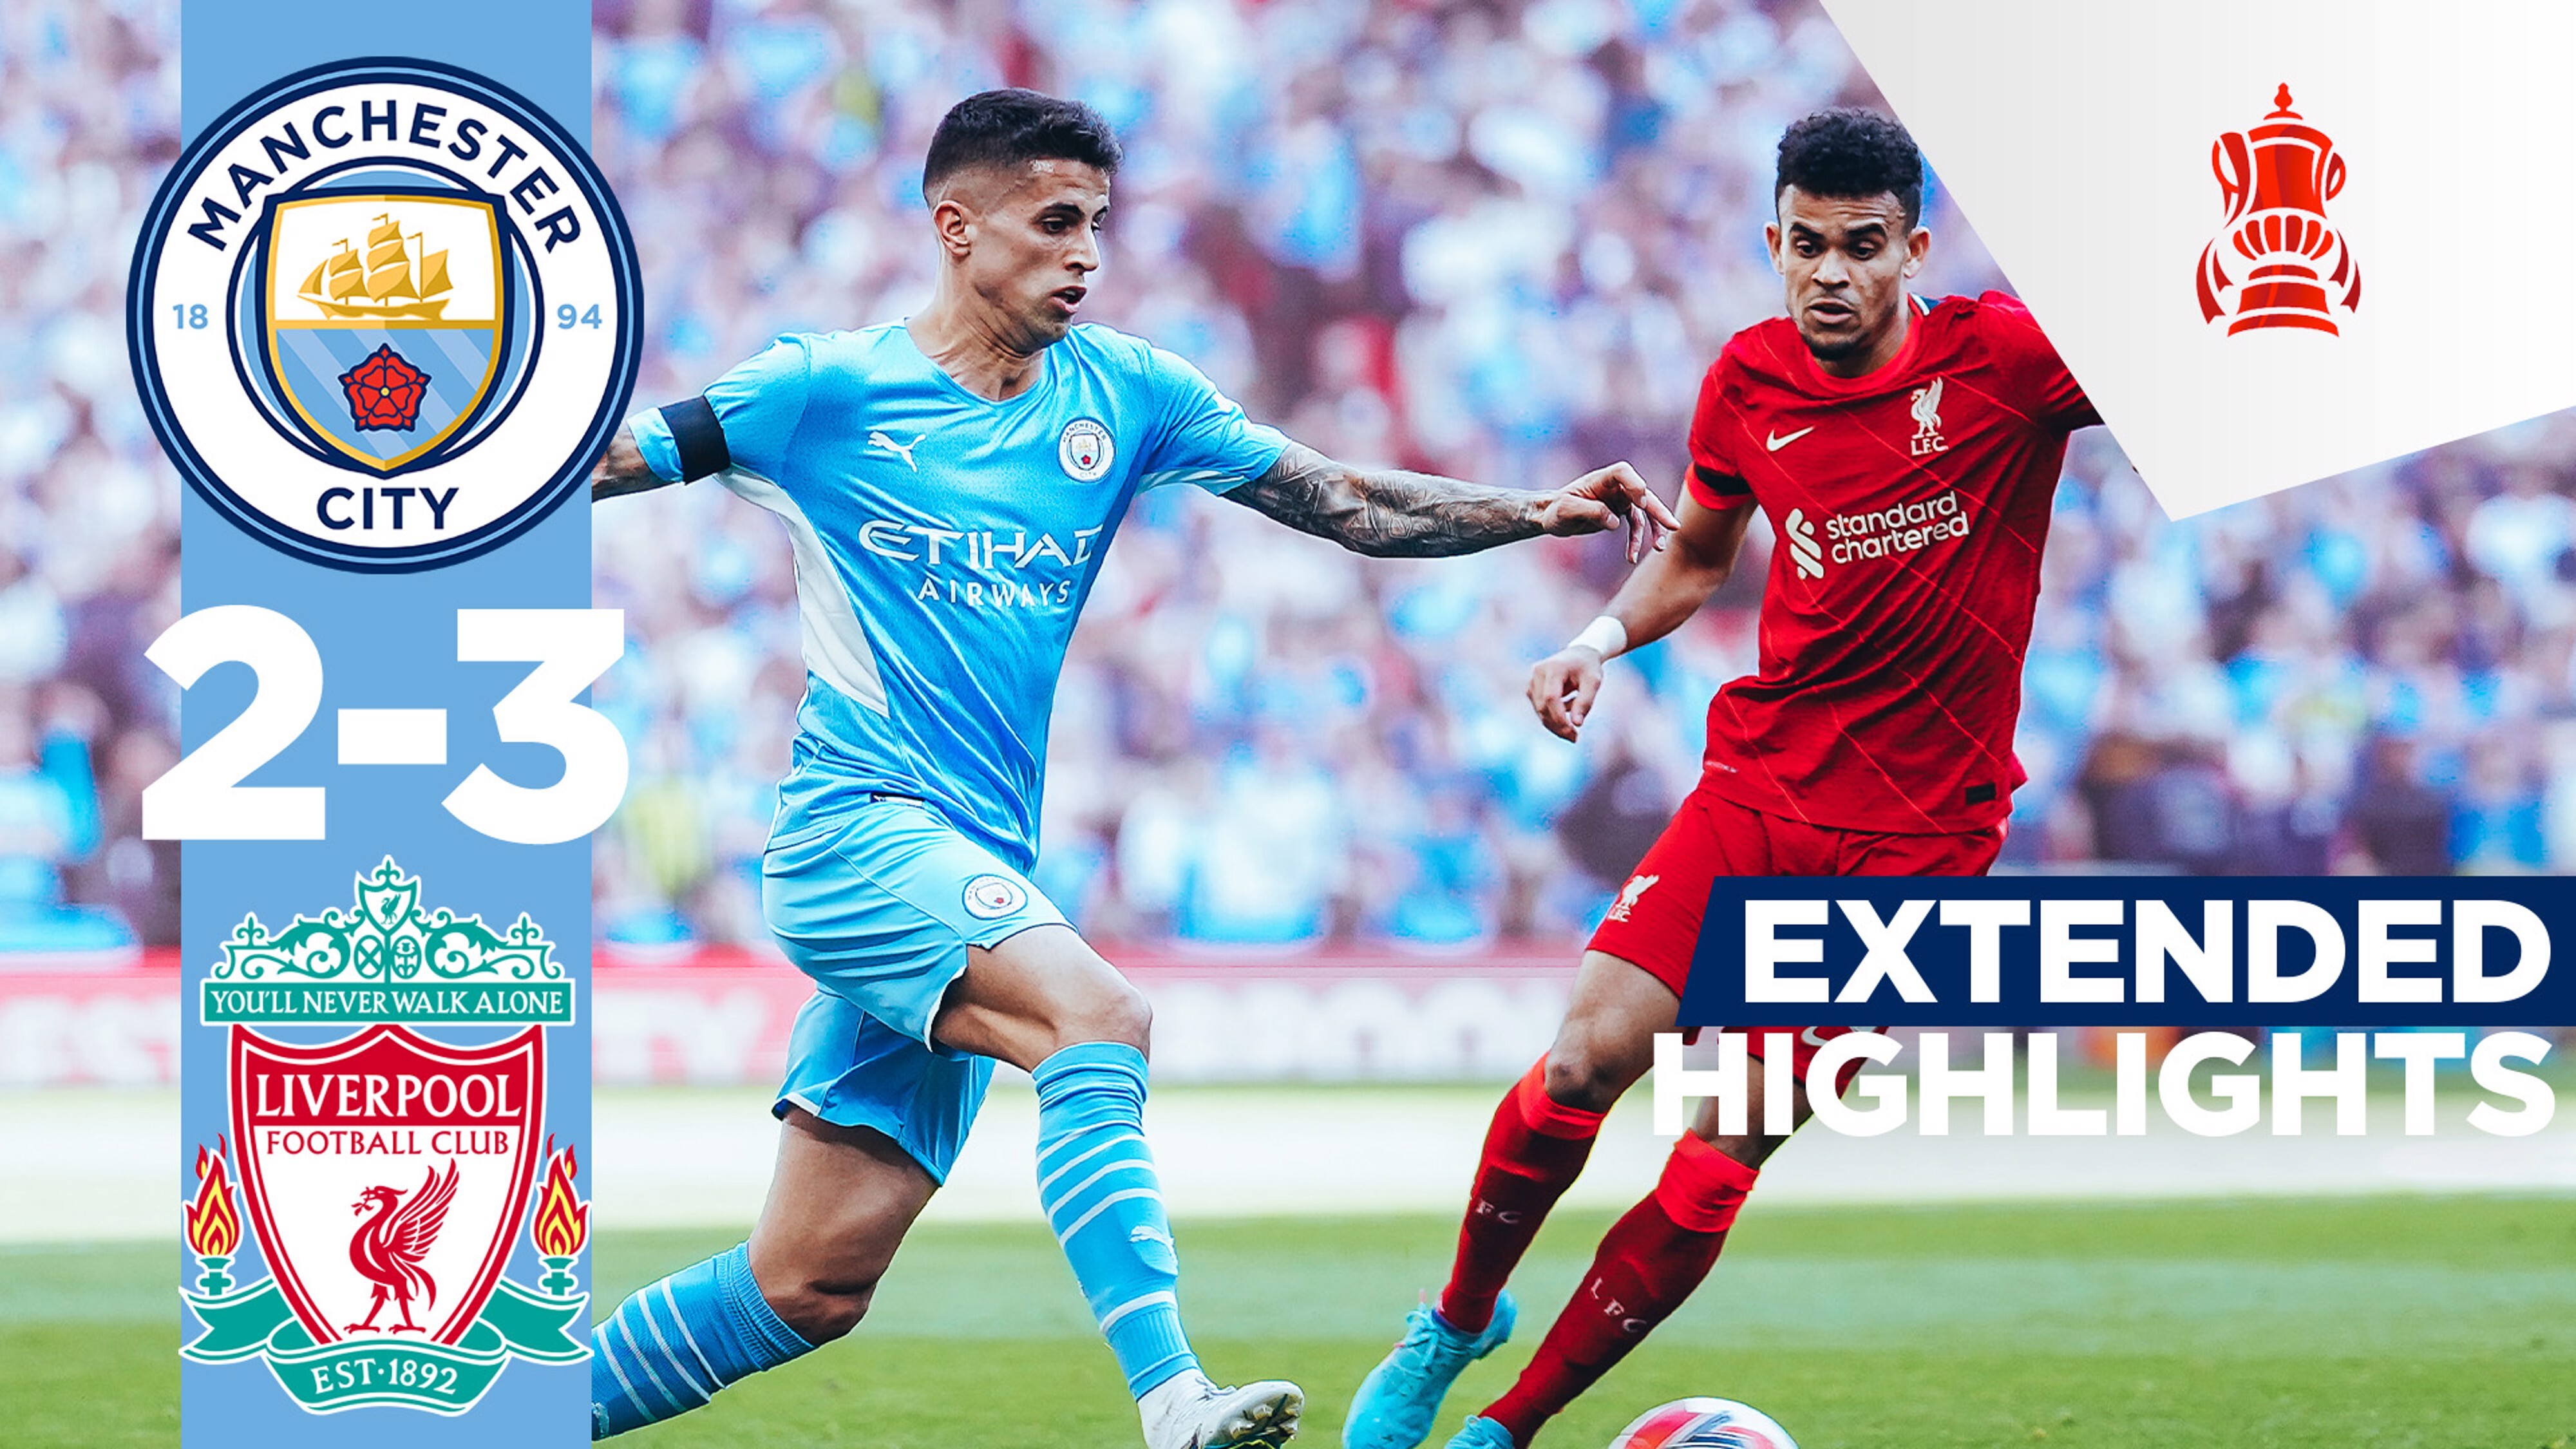 City 2-3 Liverpool Extended Highlights